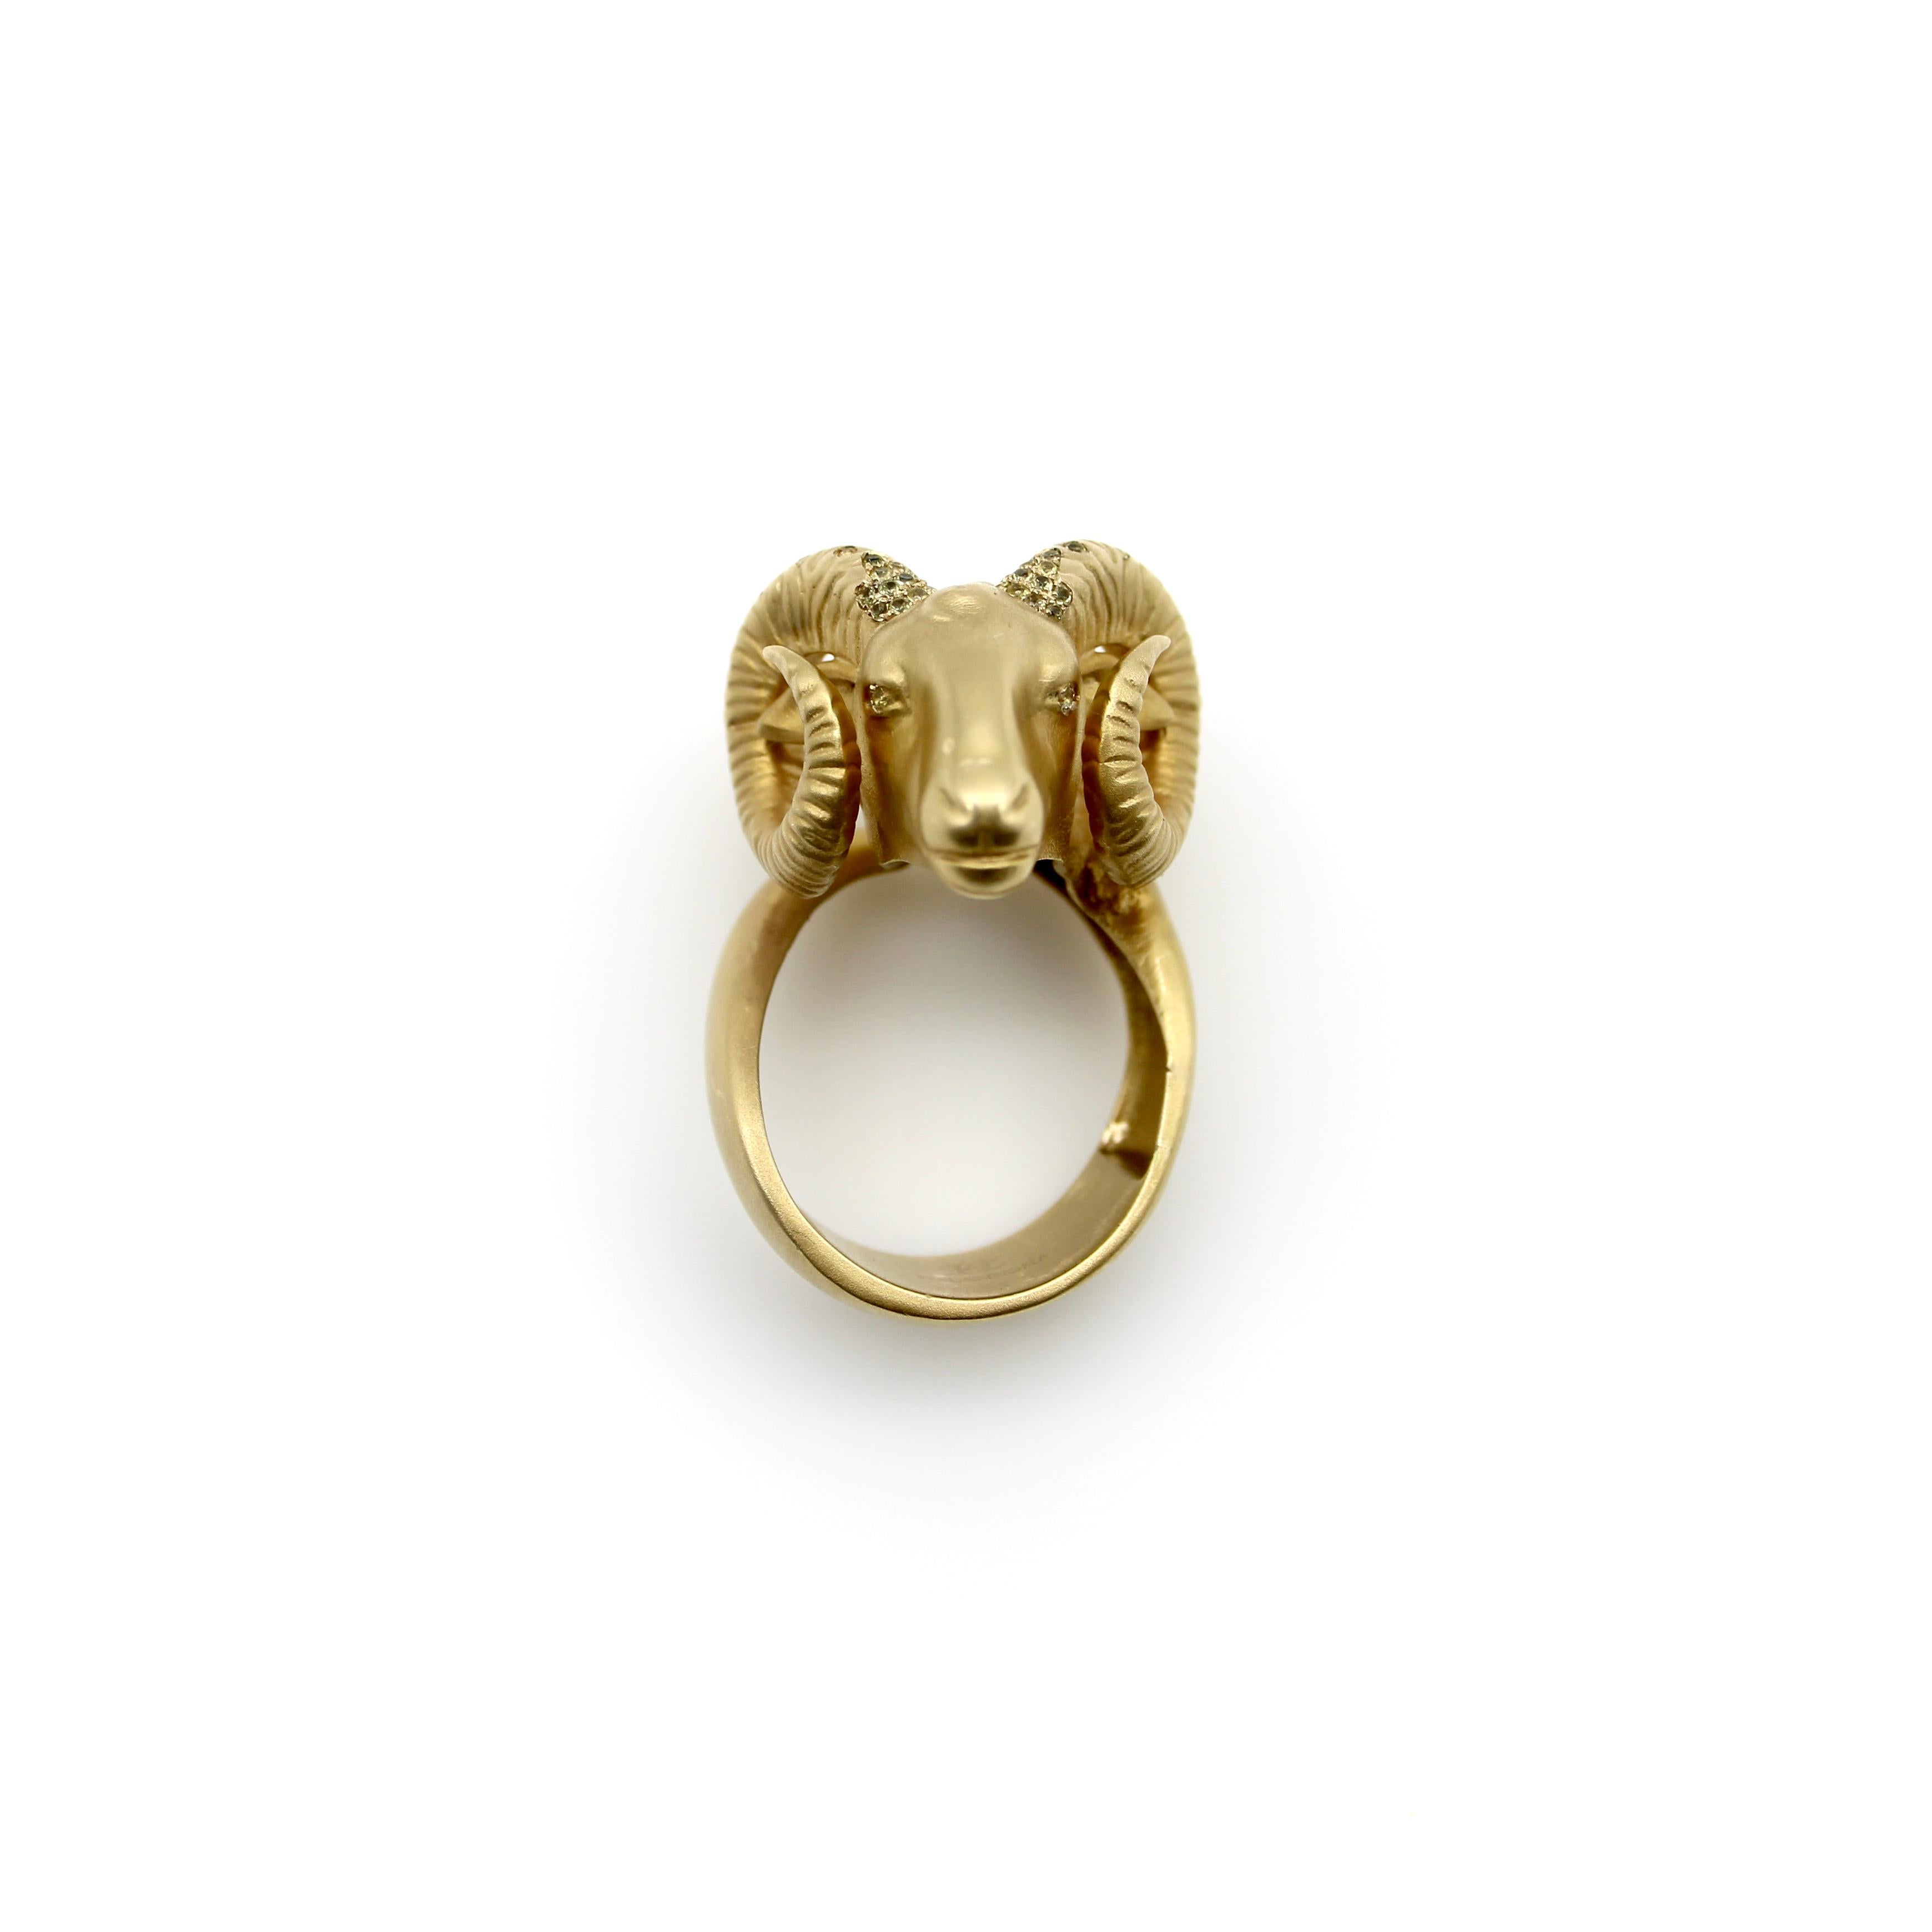 Designed by Helannona, this 14k gold ram ring has a powerful presence on the hand. The ring consists of the head of a mature ram, with a full set of horns that make a spiral around both sides of the ram’s face, while the body of the animal creates a